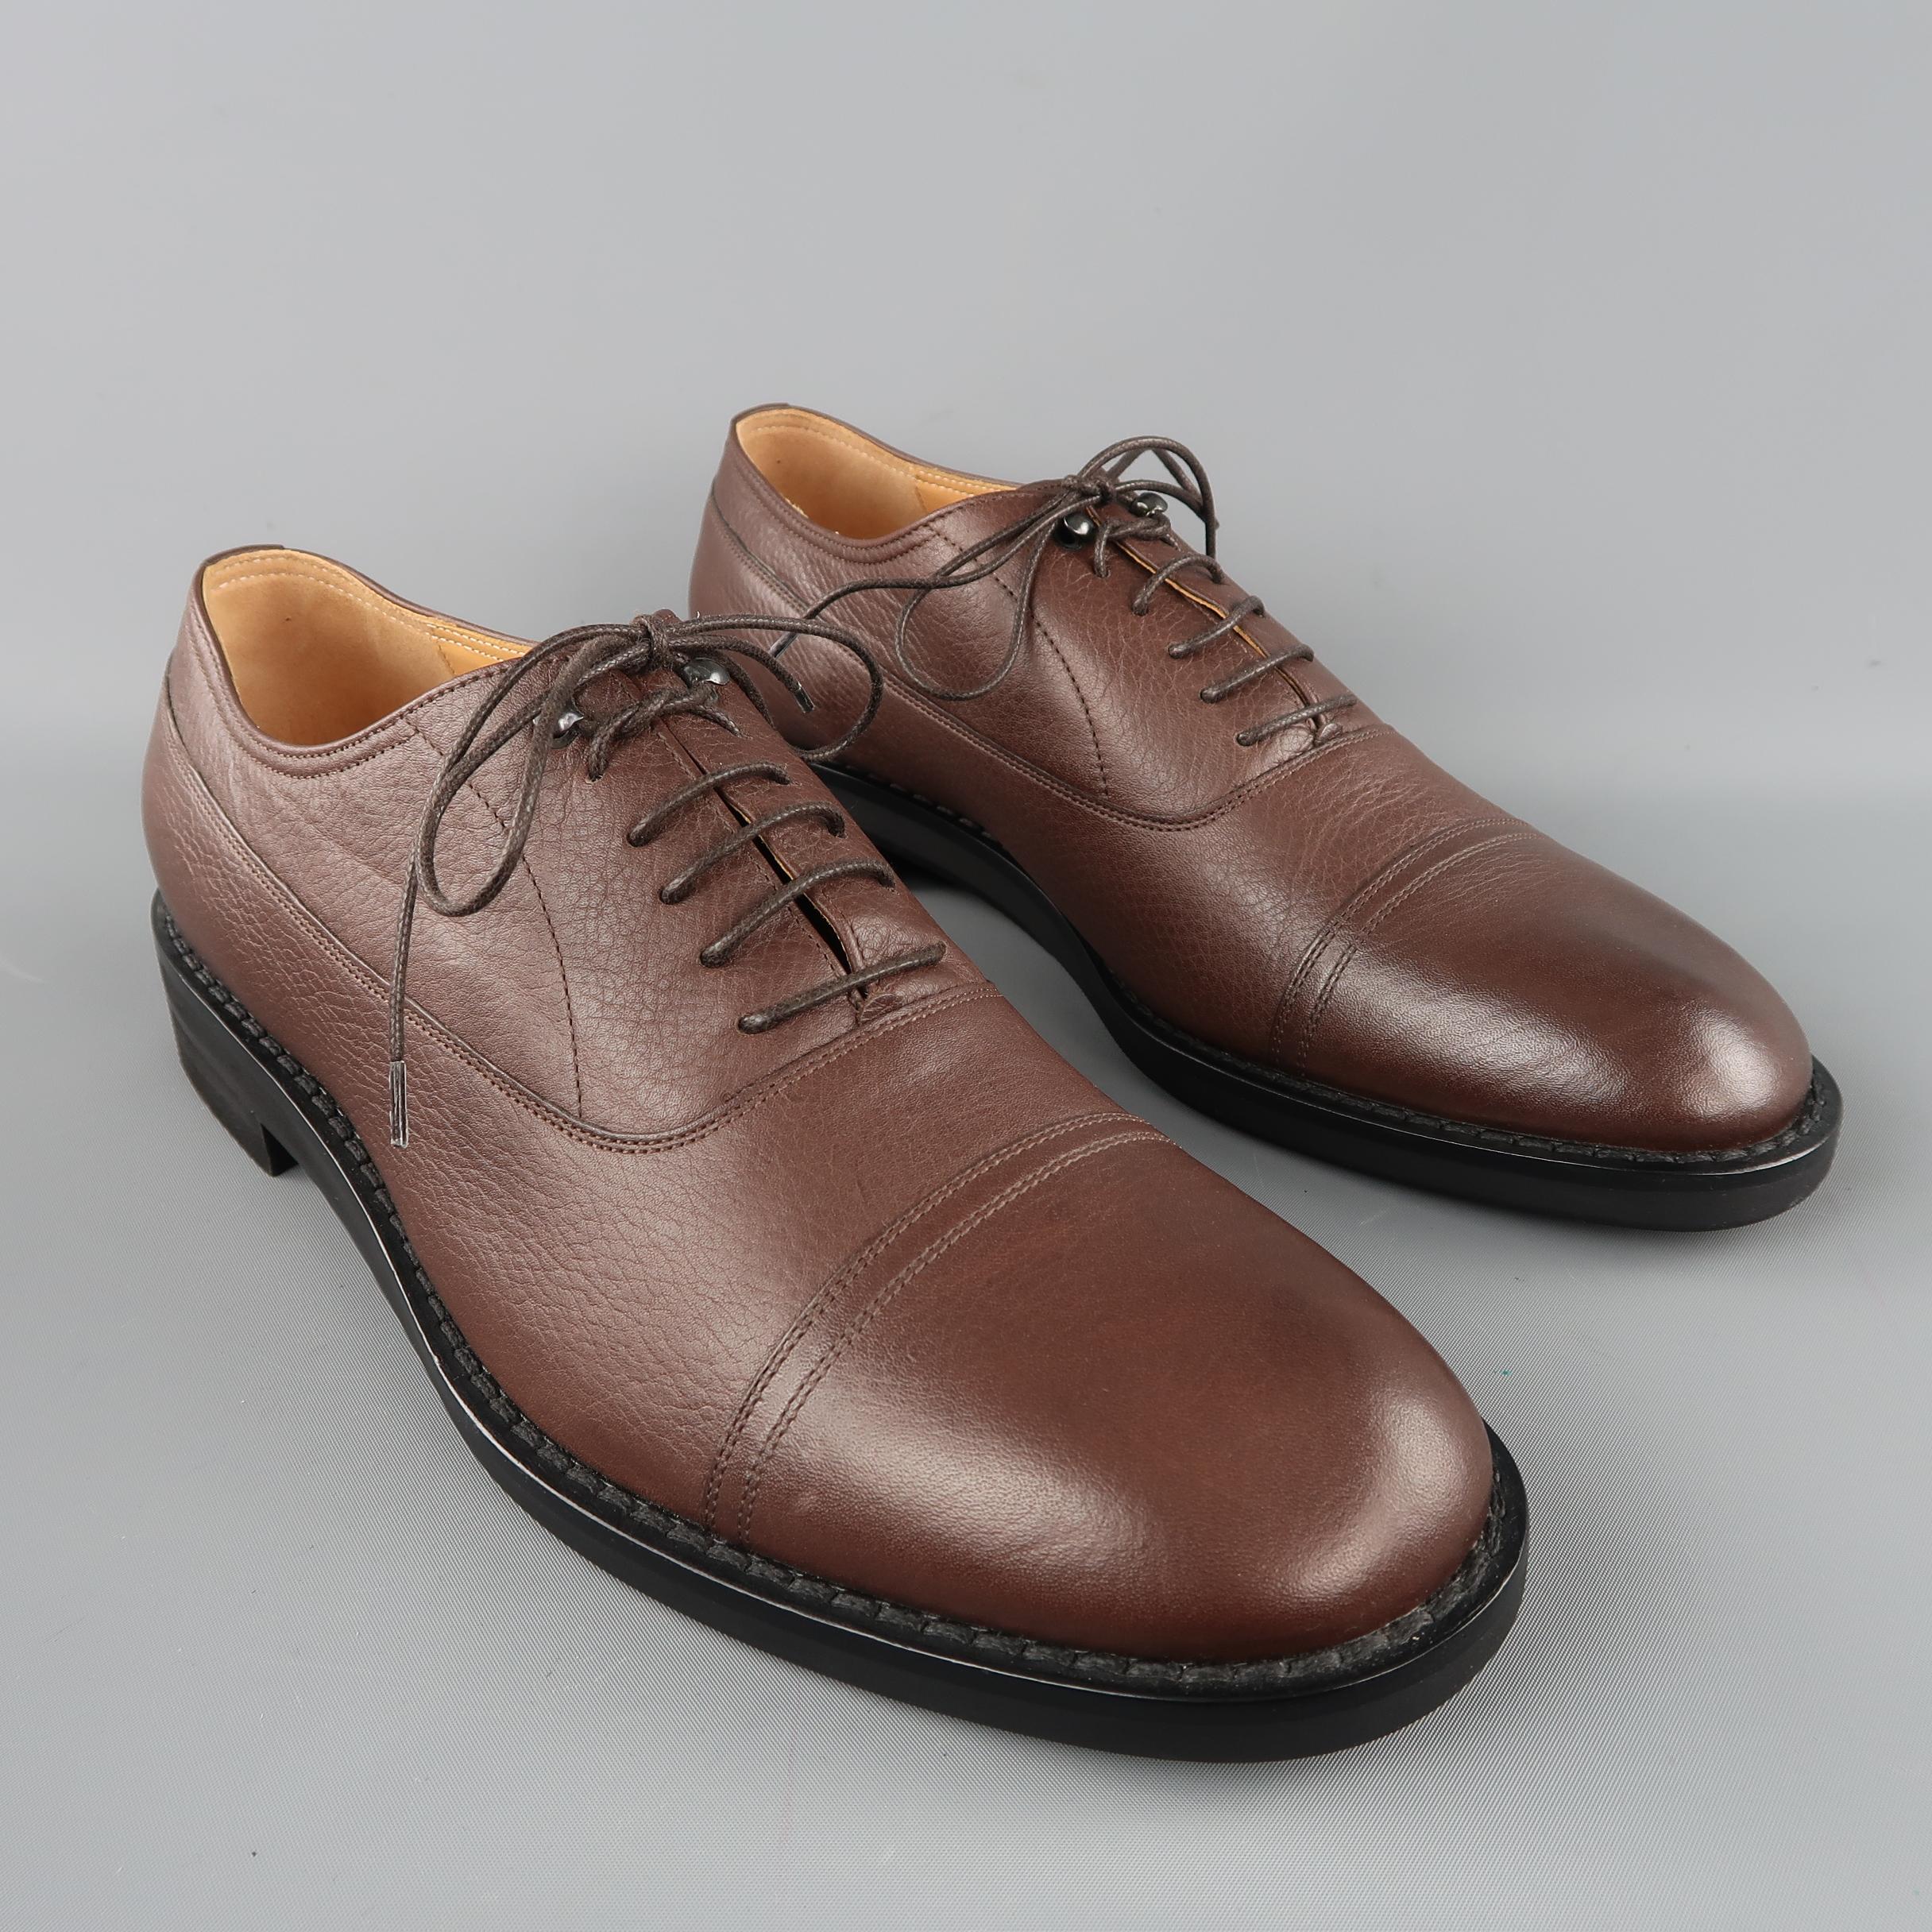 MAISON MARTIN MARGIELA shoe come in brown solid leather, with cap toe, lace up. Made in Italy.  Retails: $740
 
New with Box.
Marked: 45 IT
 
Measurements:
Outsole: 13 x 3  in.